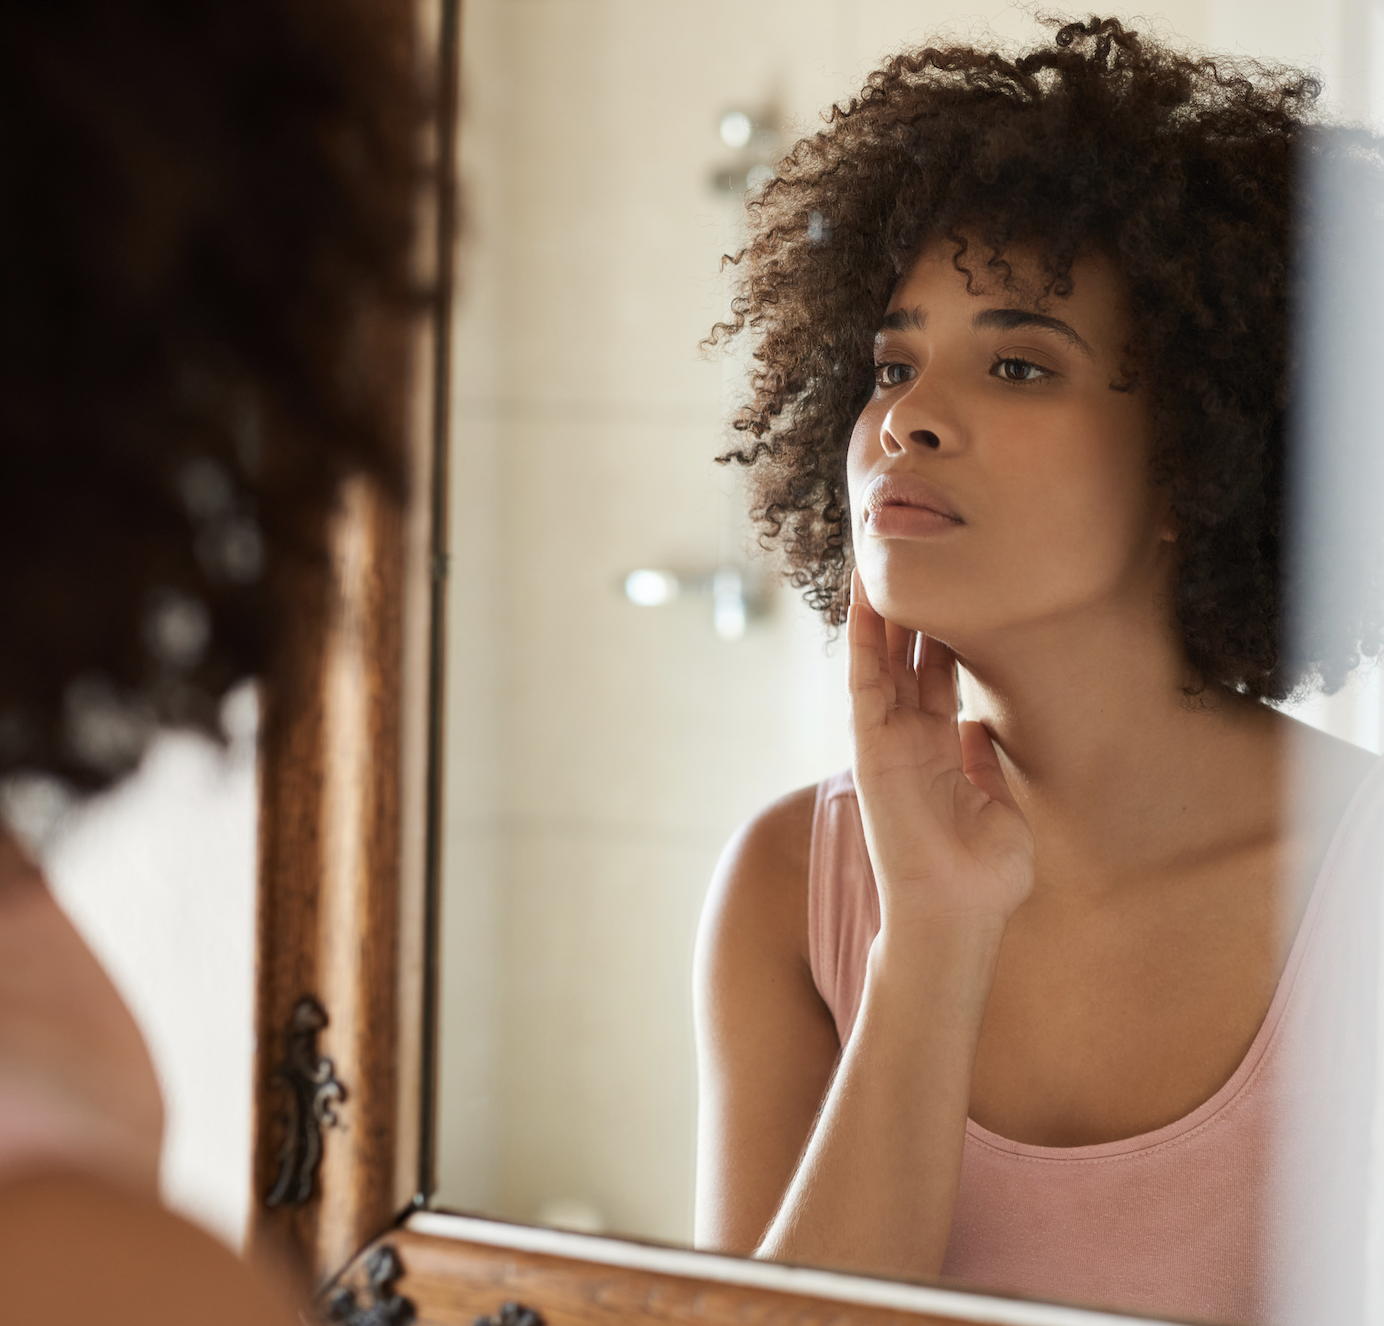 A woman staring at her reflection in a mirror in deep thought